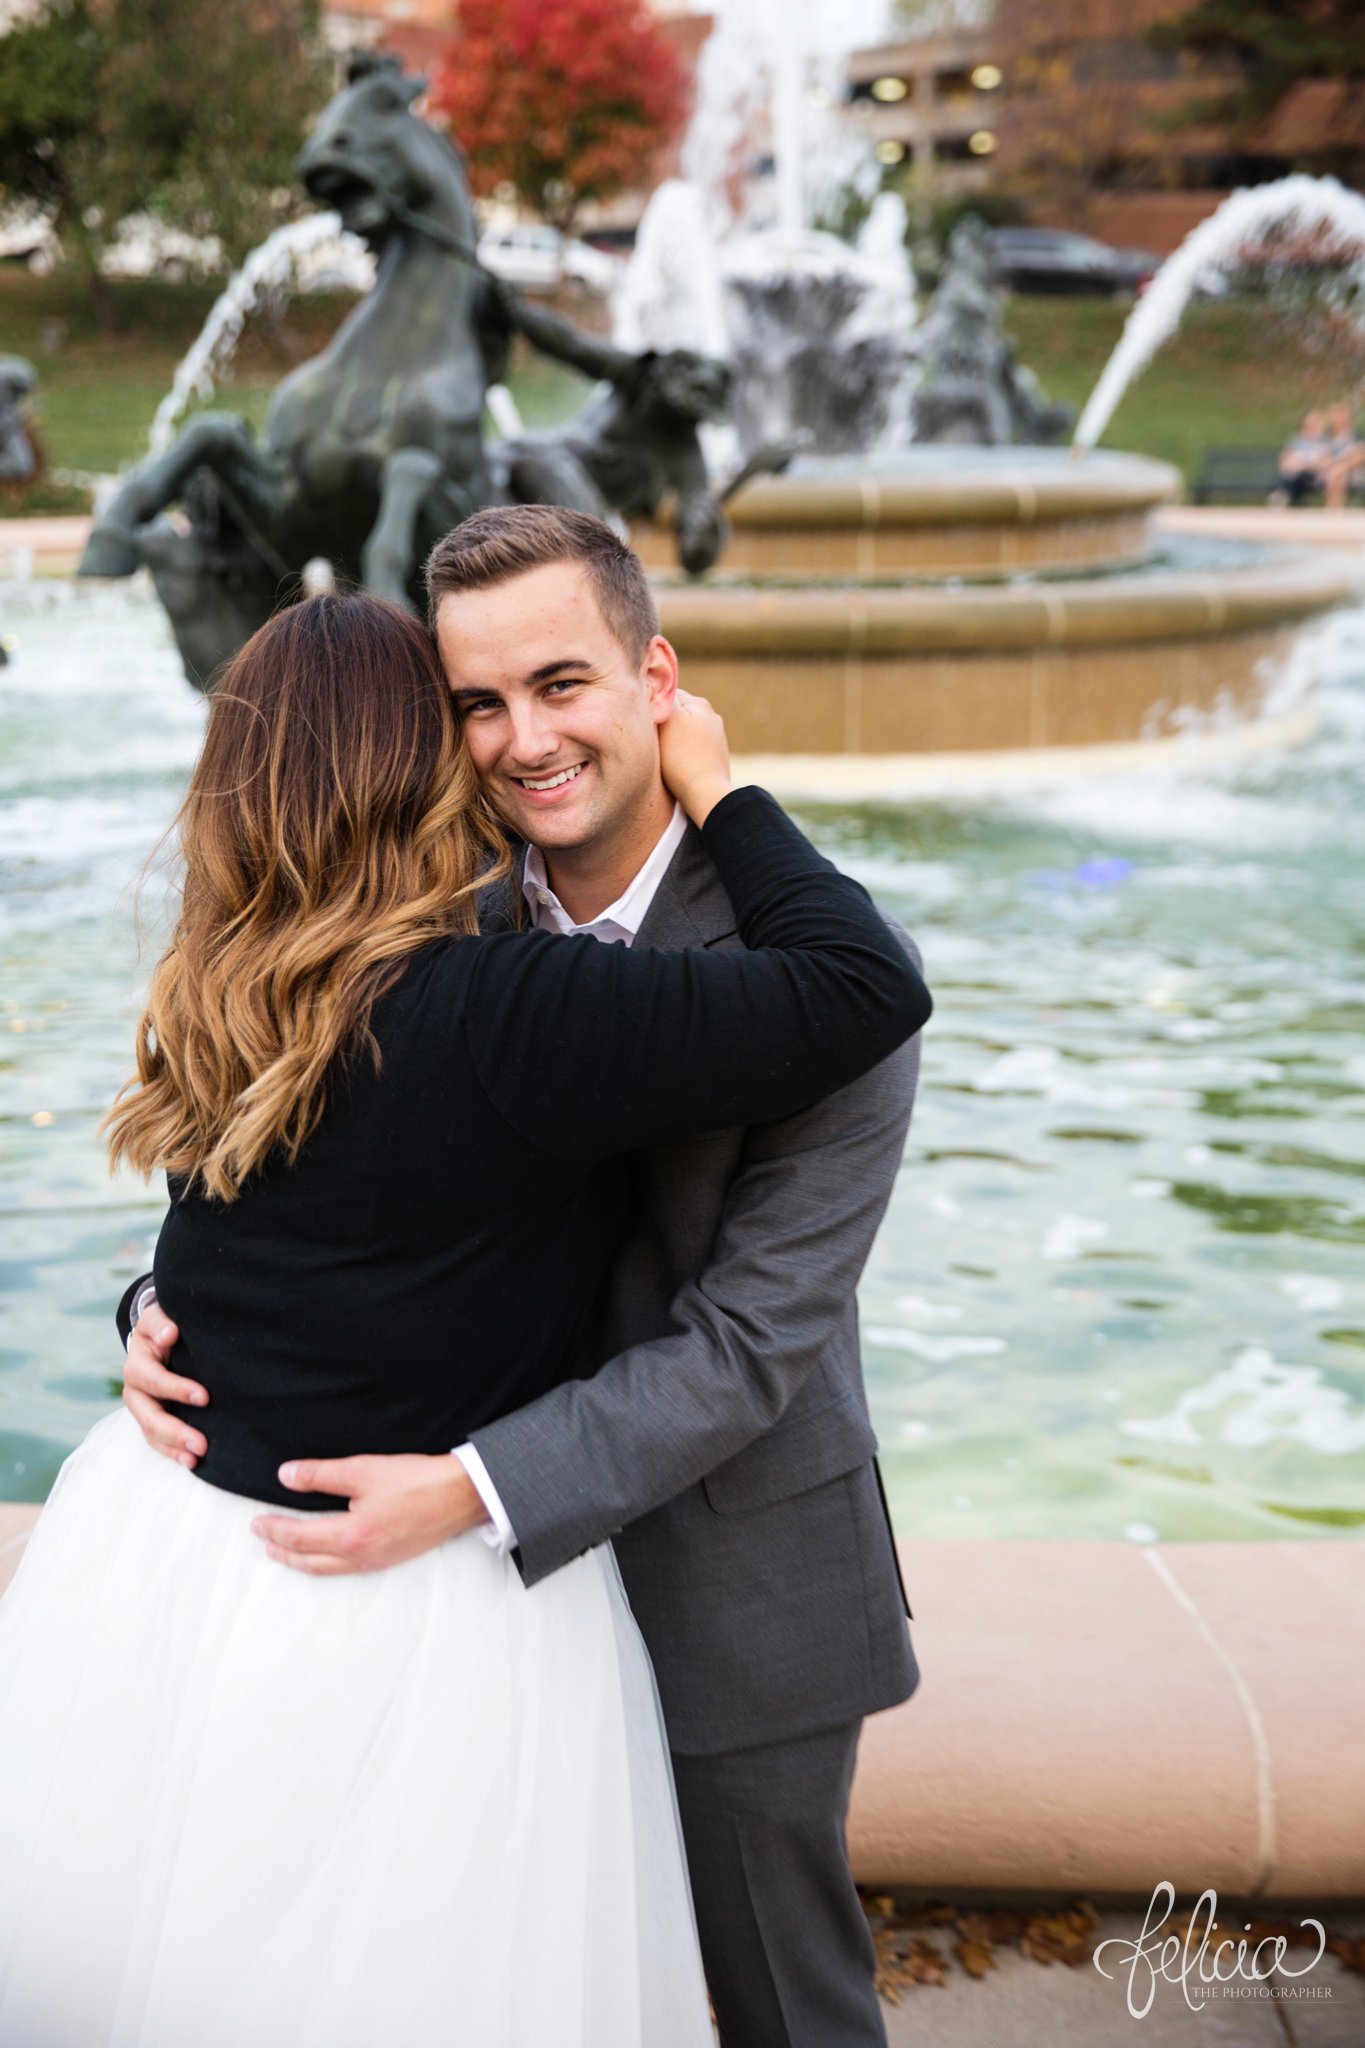 engagement photos | engagement photography | Kansas City | images by feliciathephotographer.com | architectural backgrounds | downtown | downtown Kansas City | fountain | Plaza Country Club | romantic pose | cuddling | smiling groom 